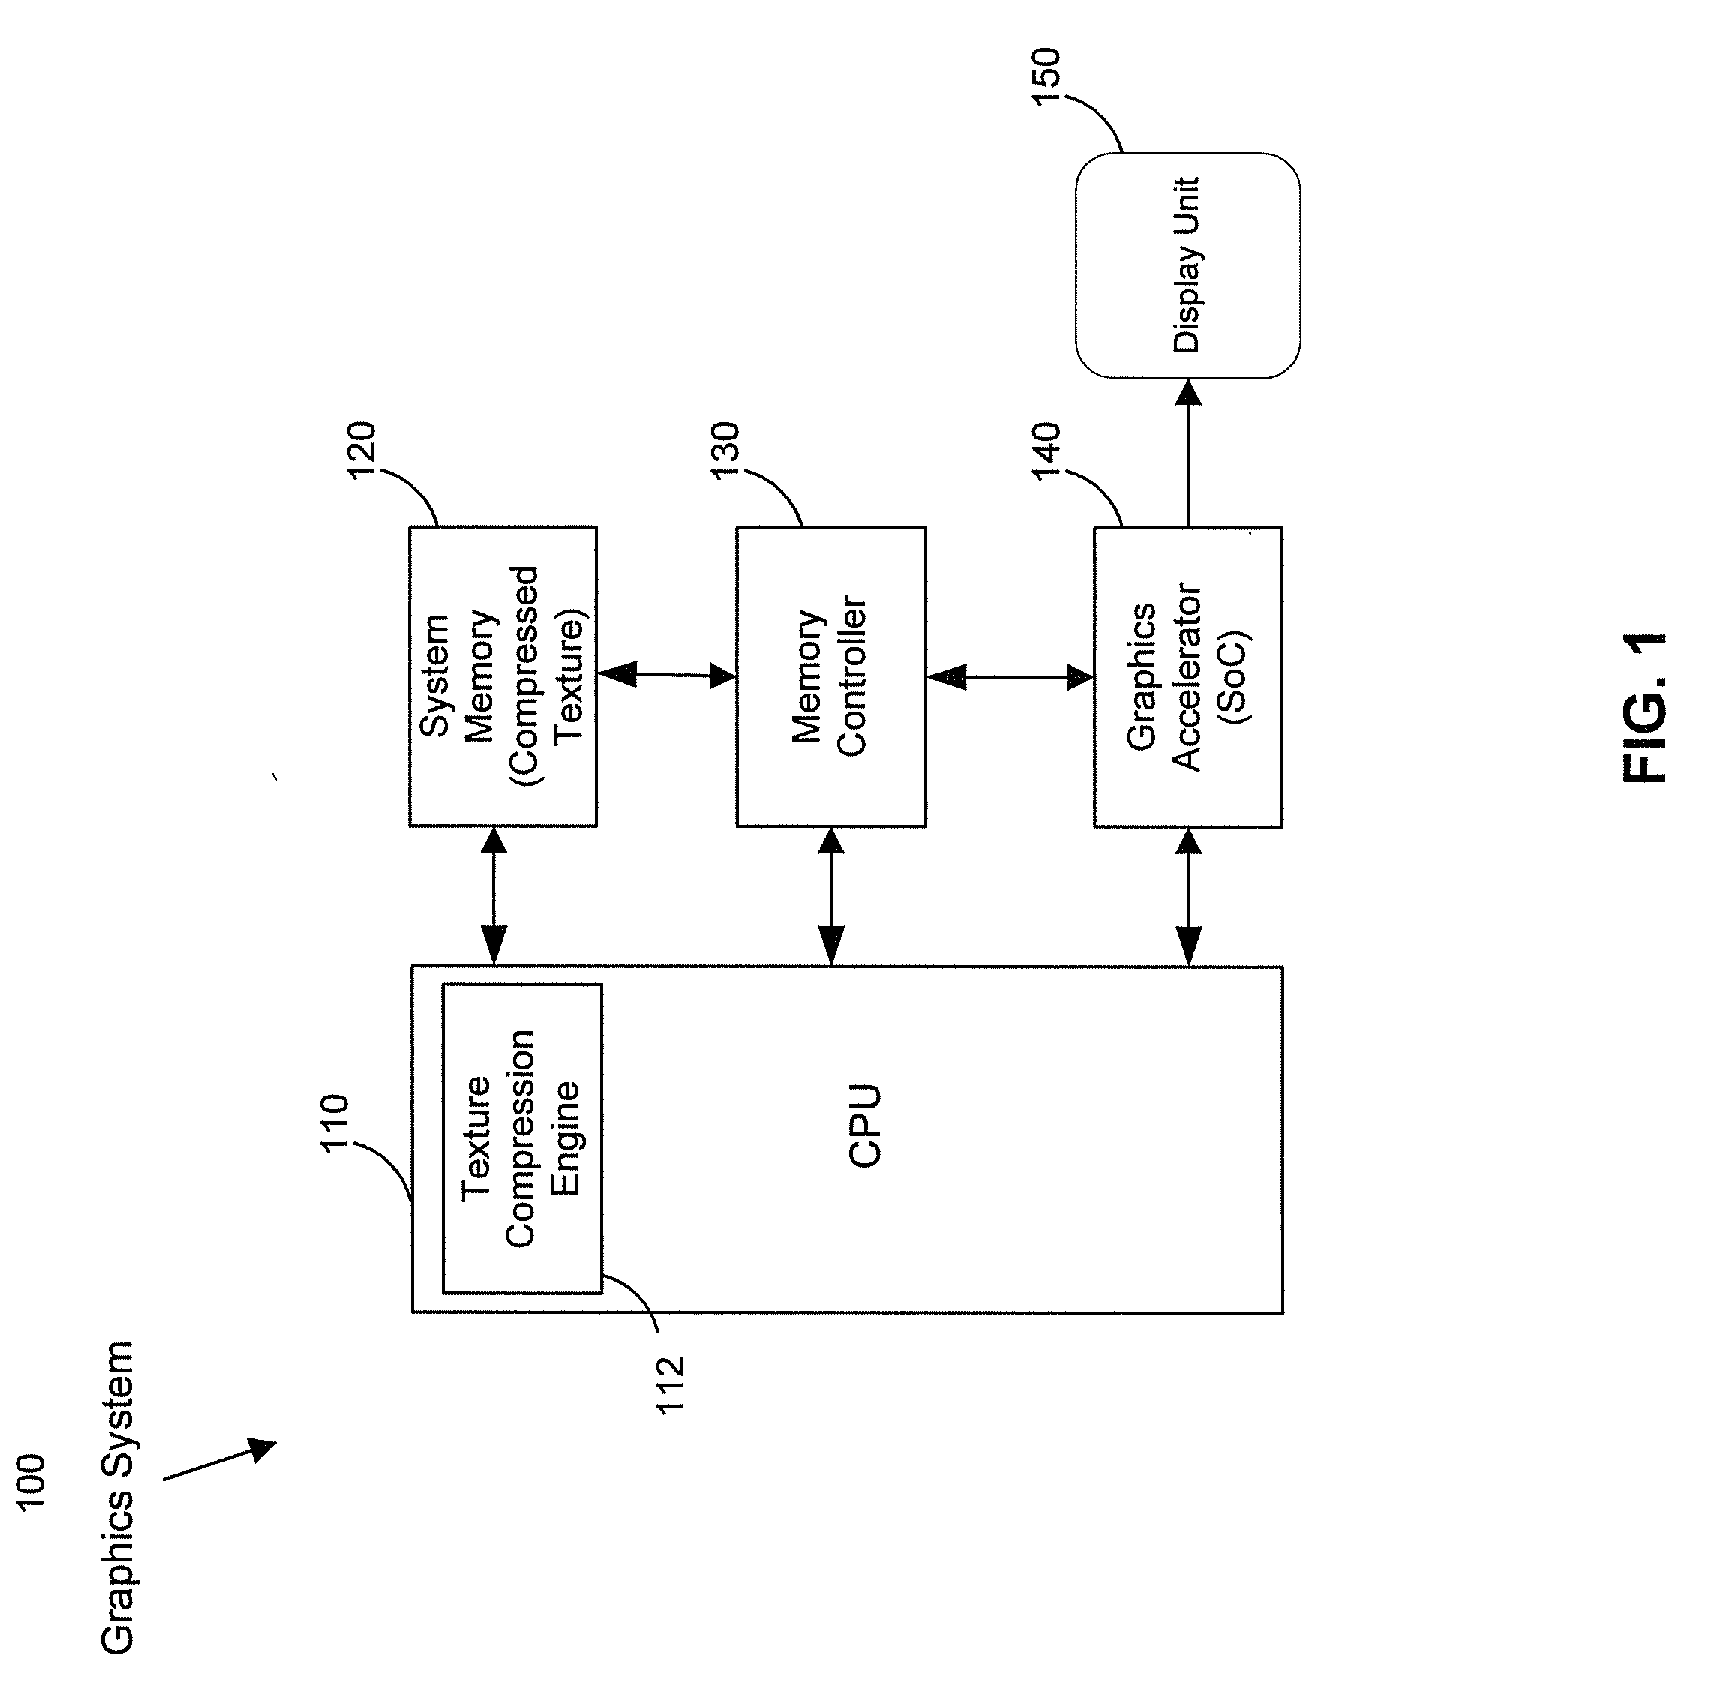 Method and system for texture compression in a system having an avc decoding and a 3D engine